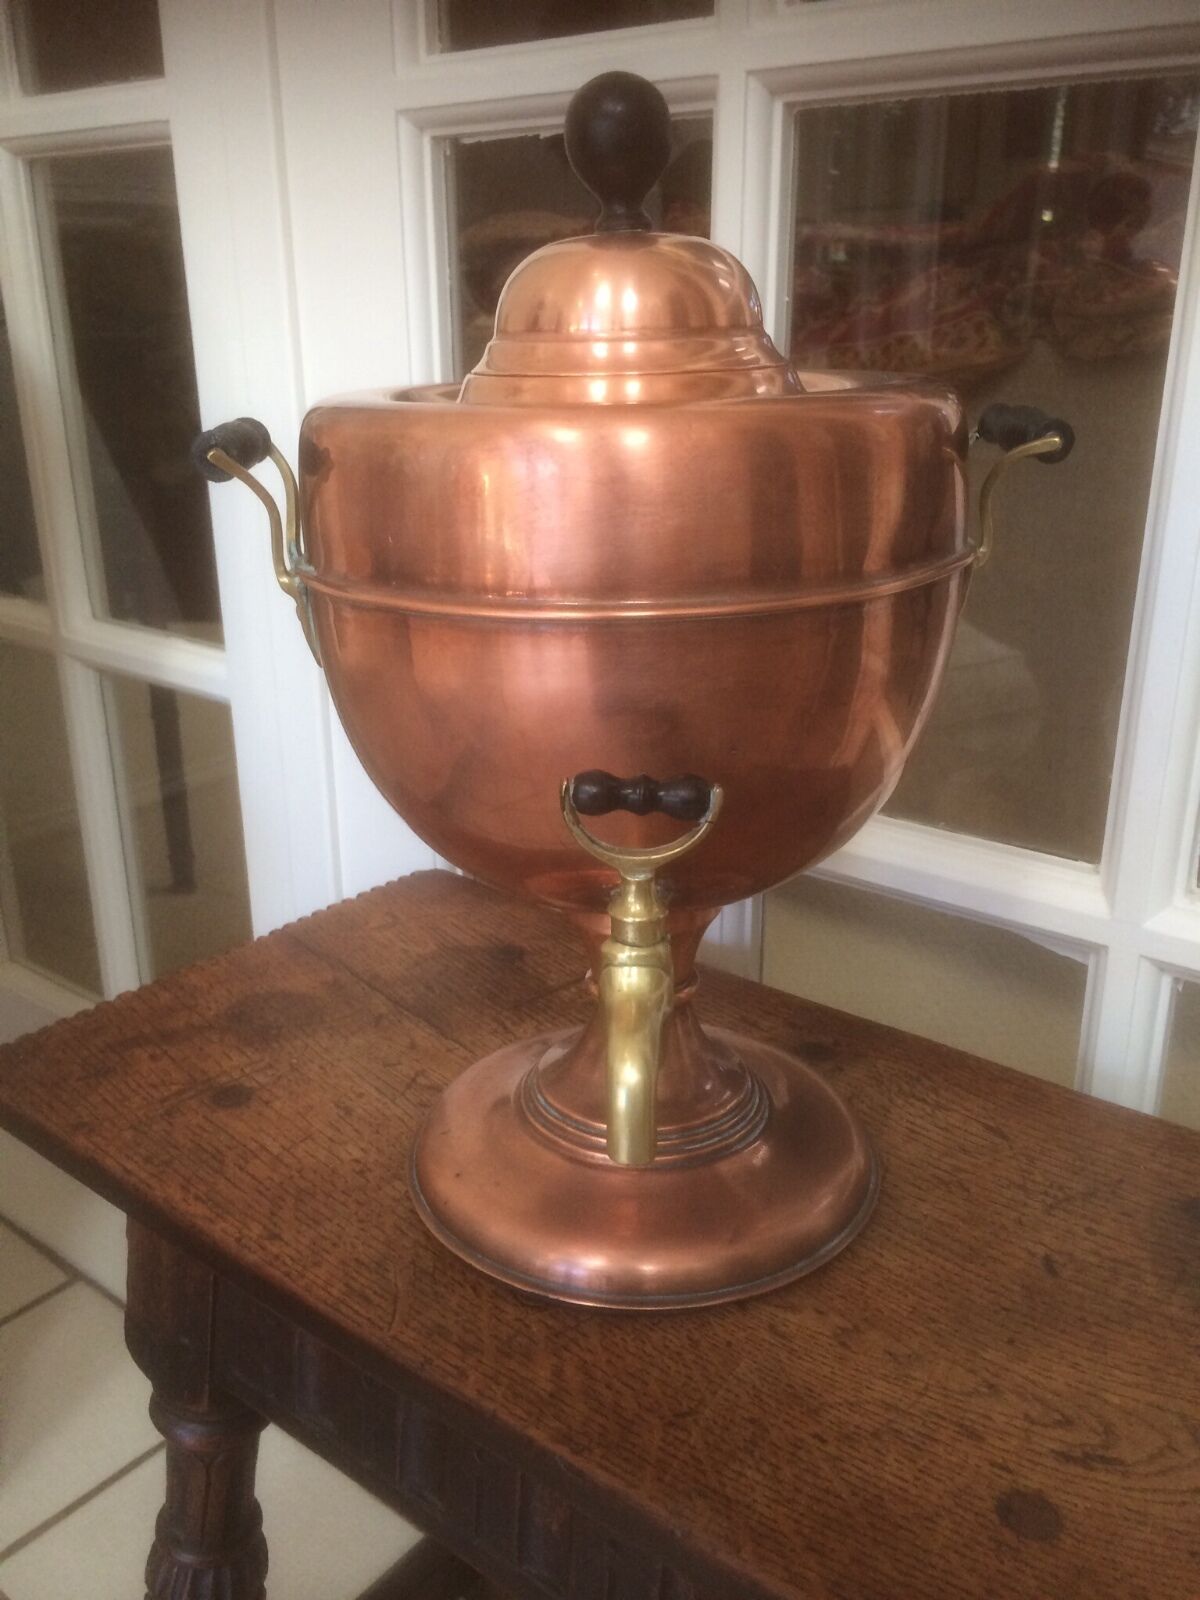 BEAUTIFUL ANTIQUE VINTAGE COPPER AND BRASS SAMOVAR COFFEE TEAPOT WORKING